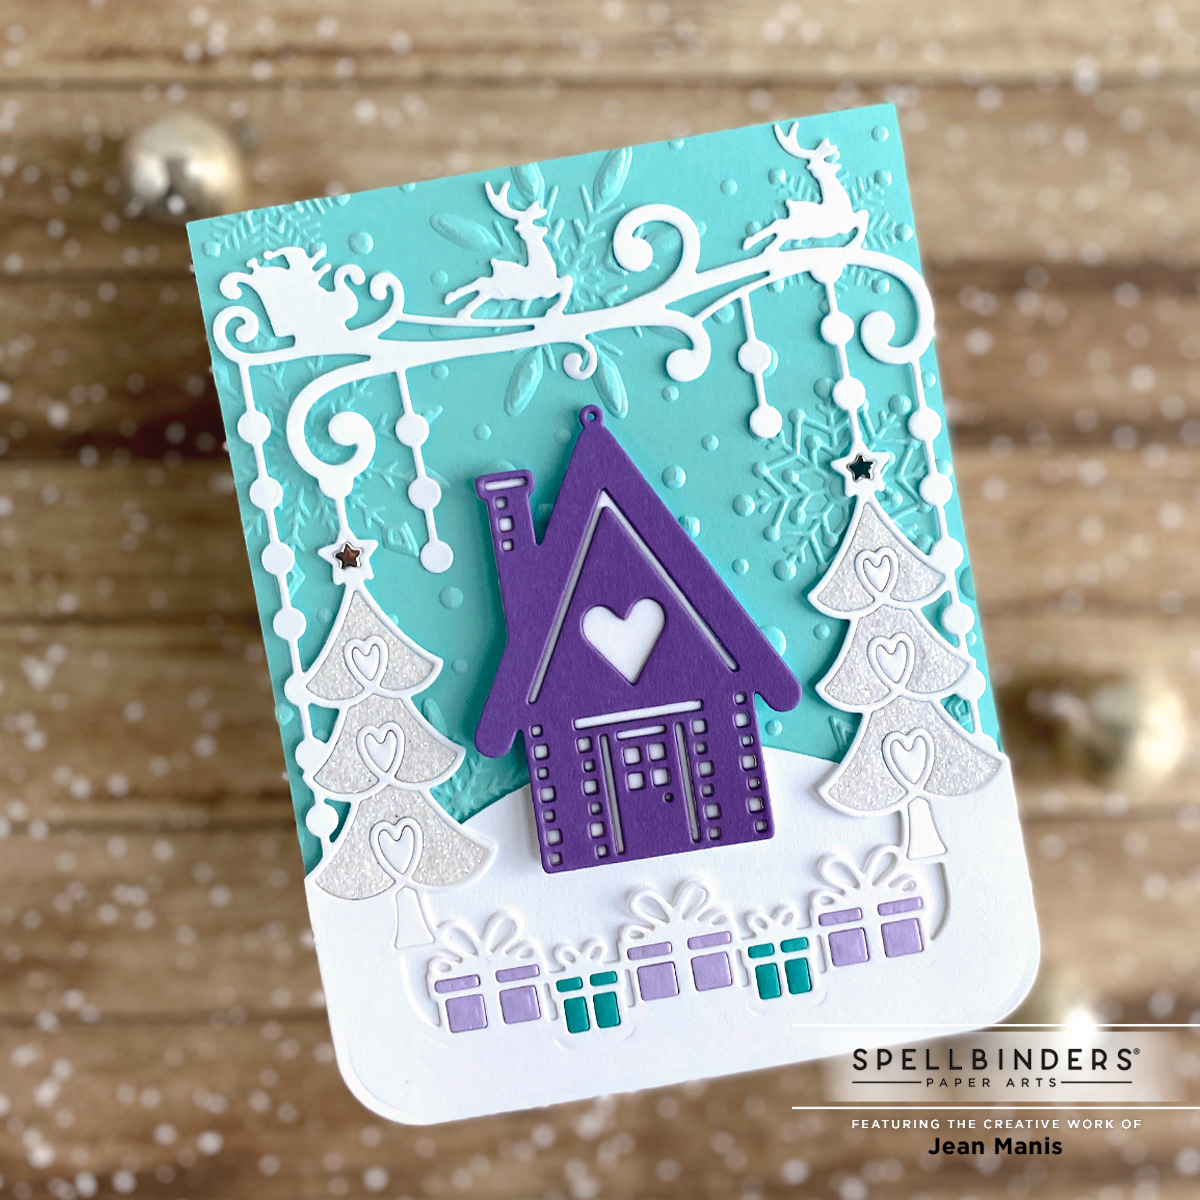 Spellbinders | All Hearts Come Home Take Two